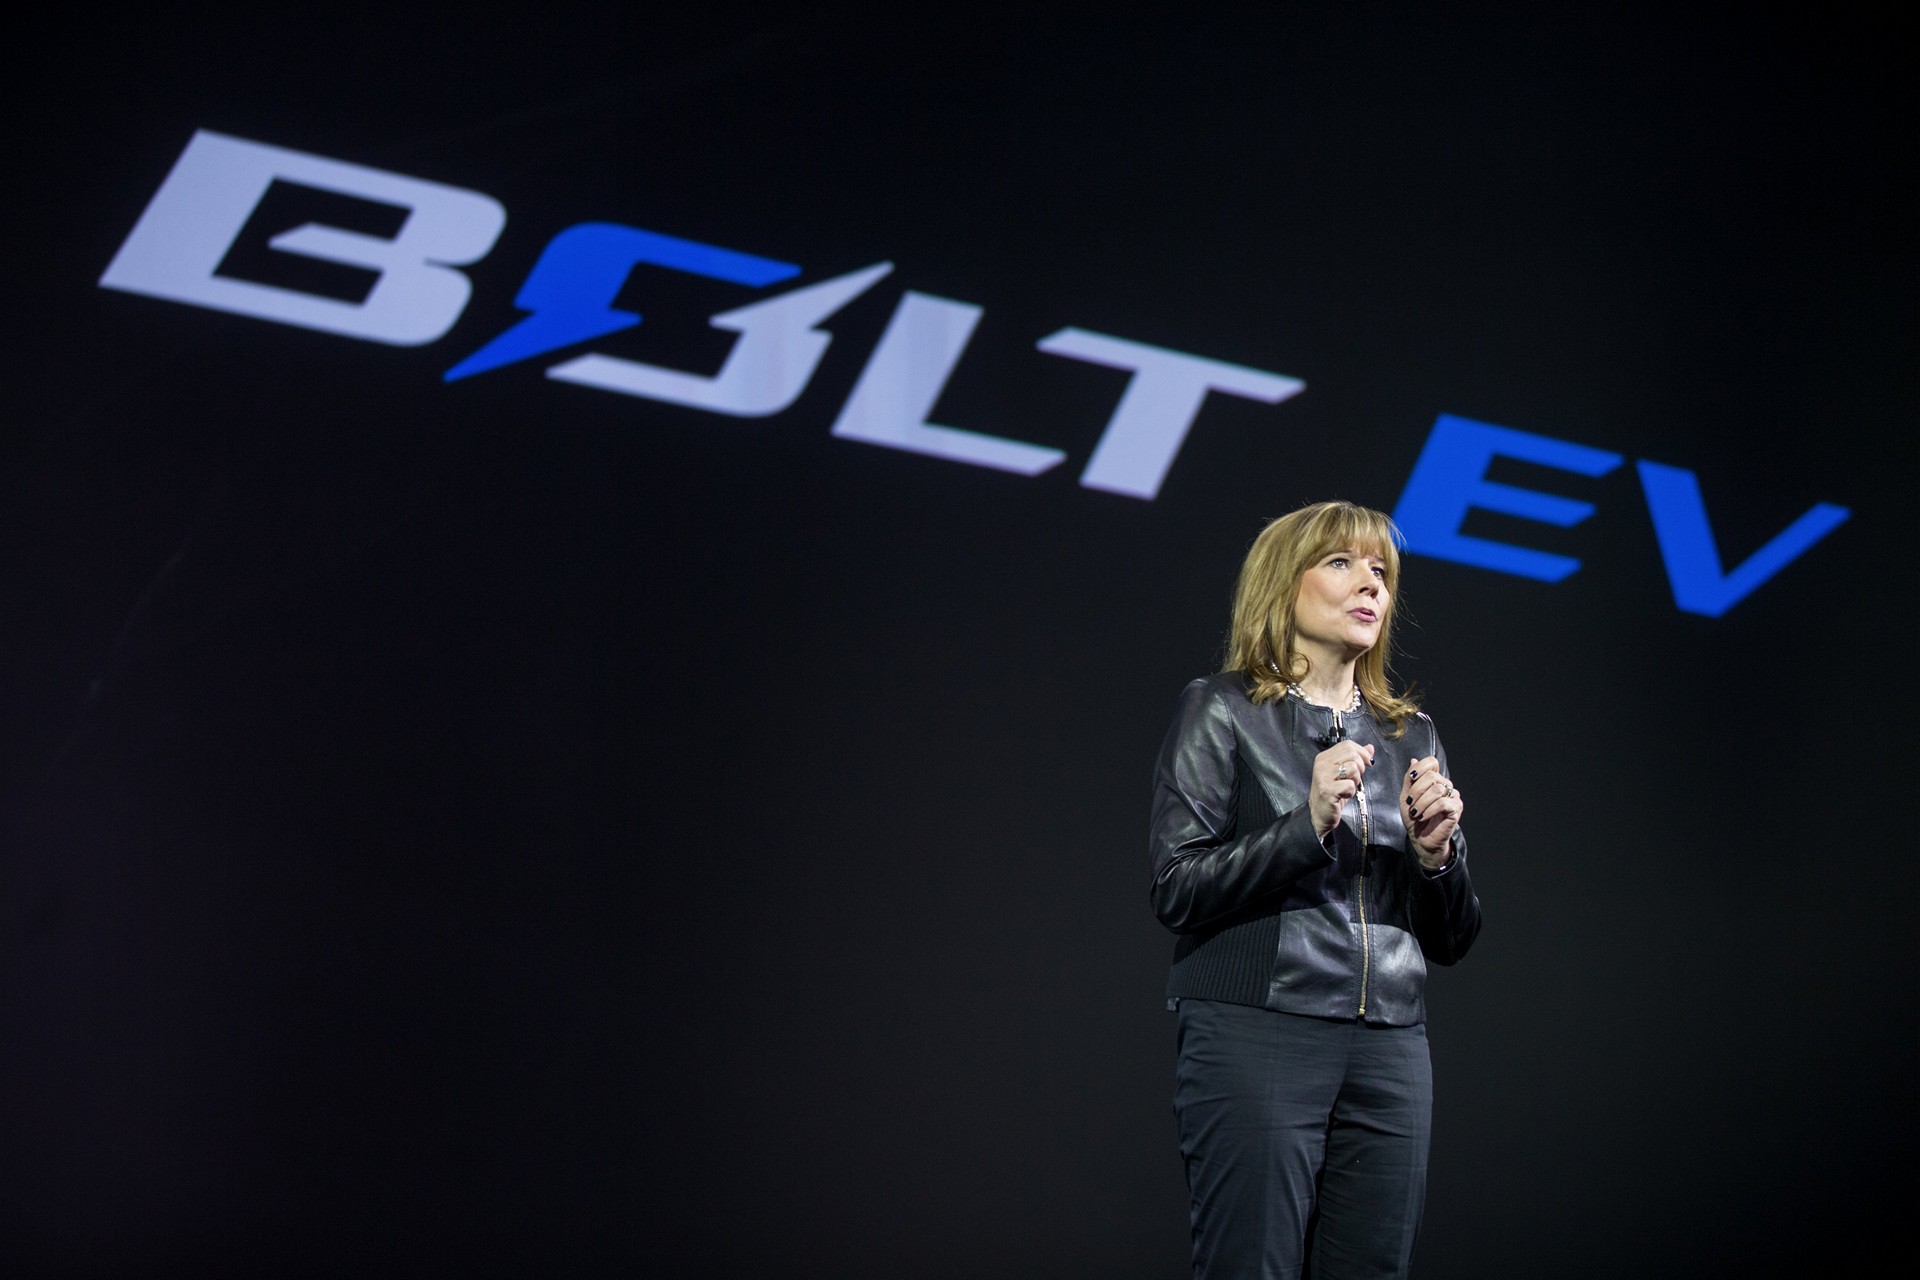 General Motors Chairman and CEO Mary Barra introduces the 2017 Chevrolet Bolt EV at its world debut during the Consumer Electronics Show Wednesday, January 6, 2016 in Las Vegas, Nevada © General Motors